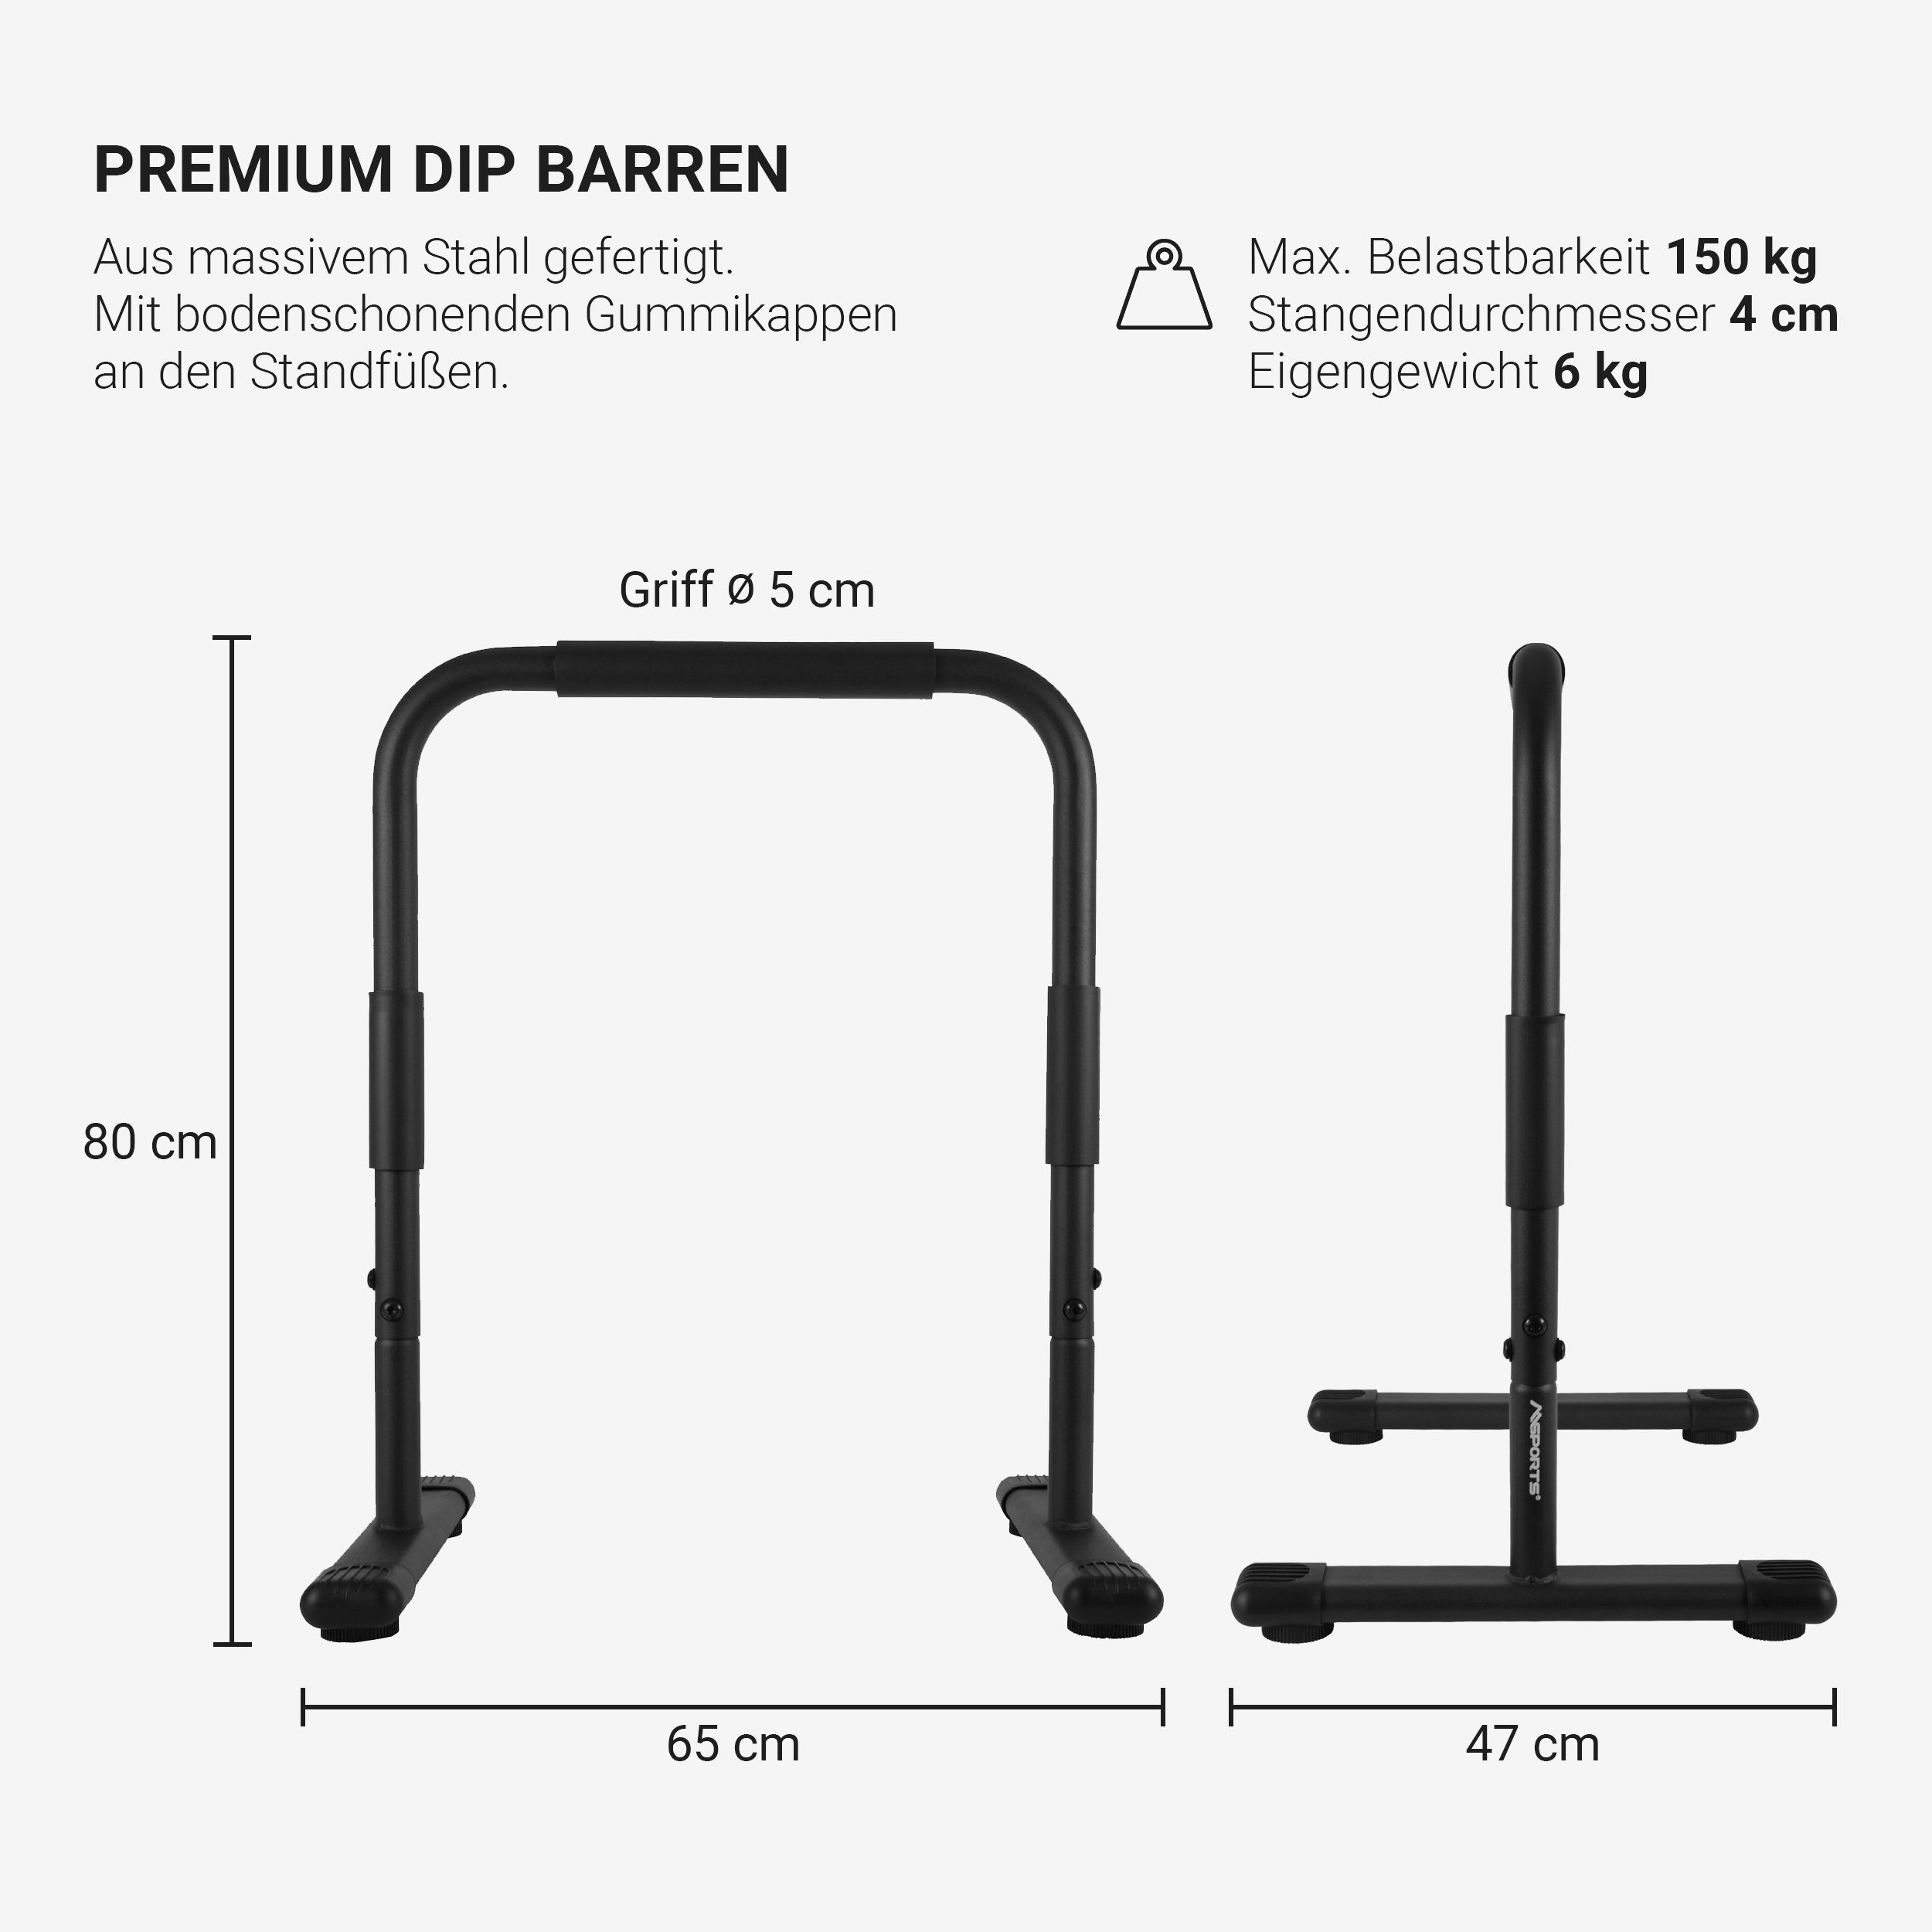 Msports Dip barren Fitness parallettes Premium Push Up Stand Bar I Dip Station I Fitness Rack 80 x 65 cm coppia 